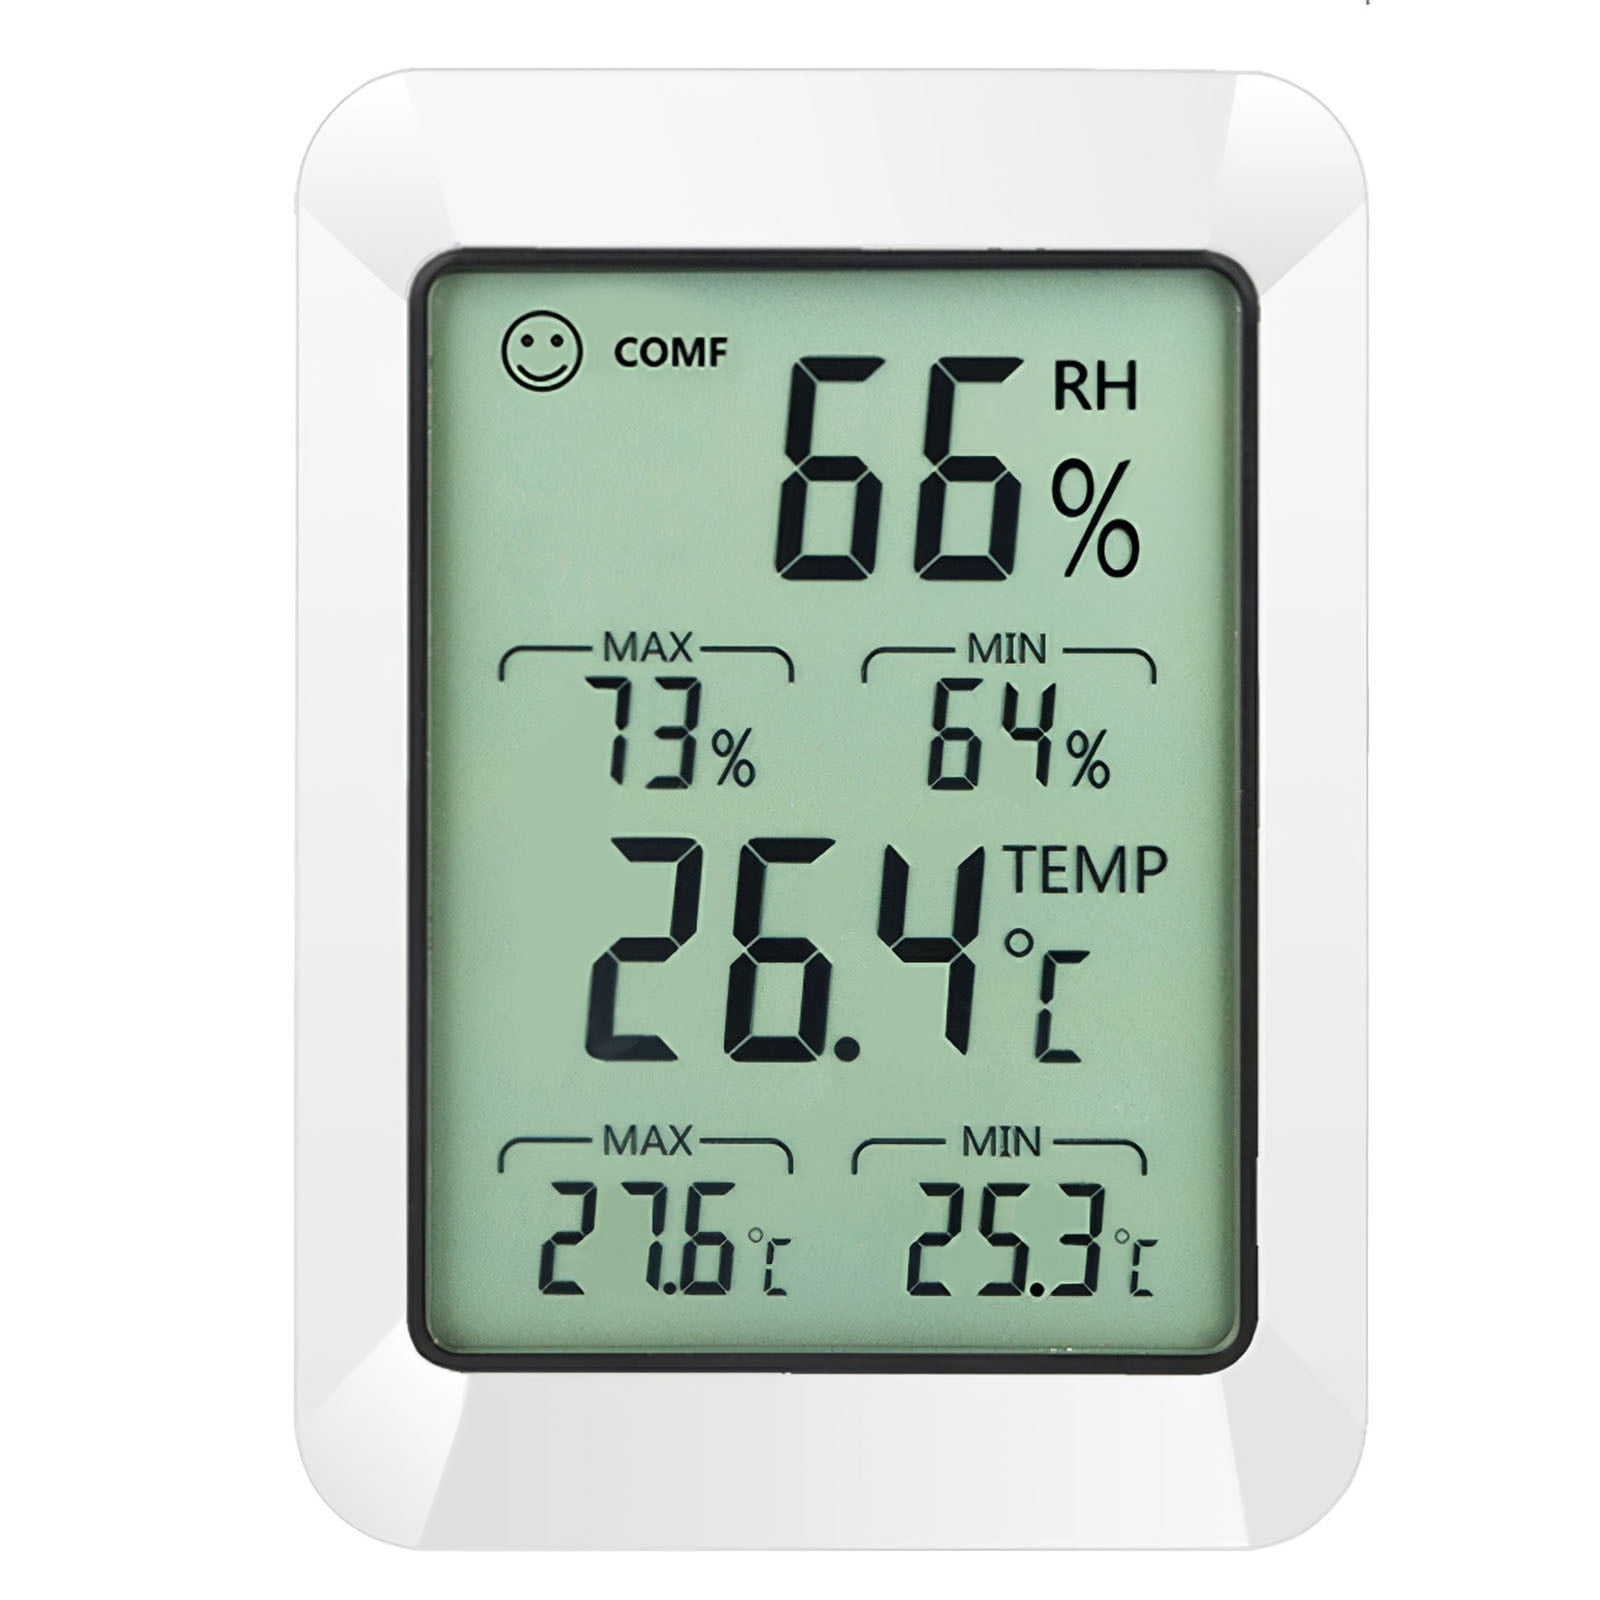 Details about   Digital_Display Outdoor Thermometer Hygrometer Temperature Humidity With Sensor 